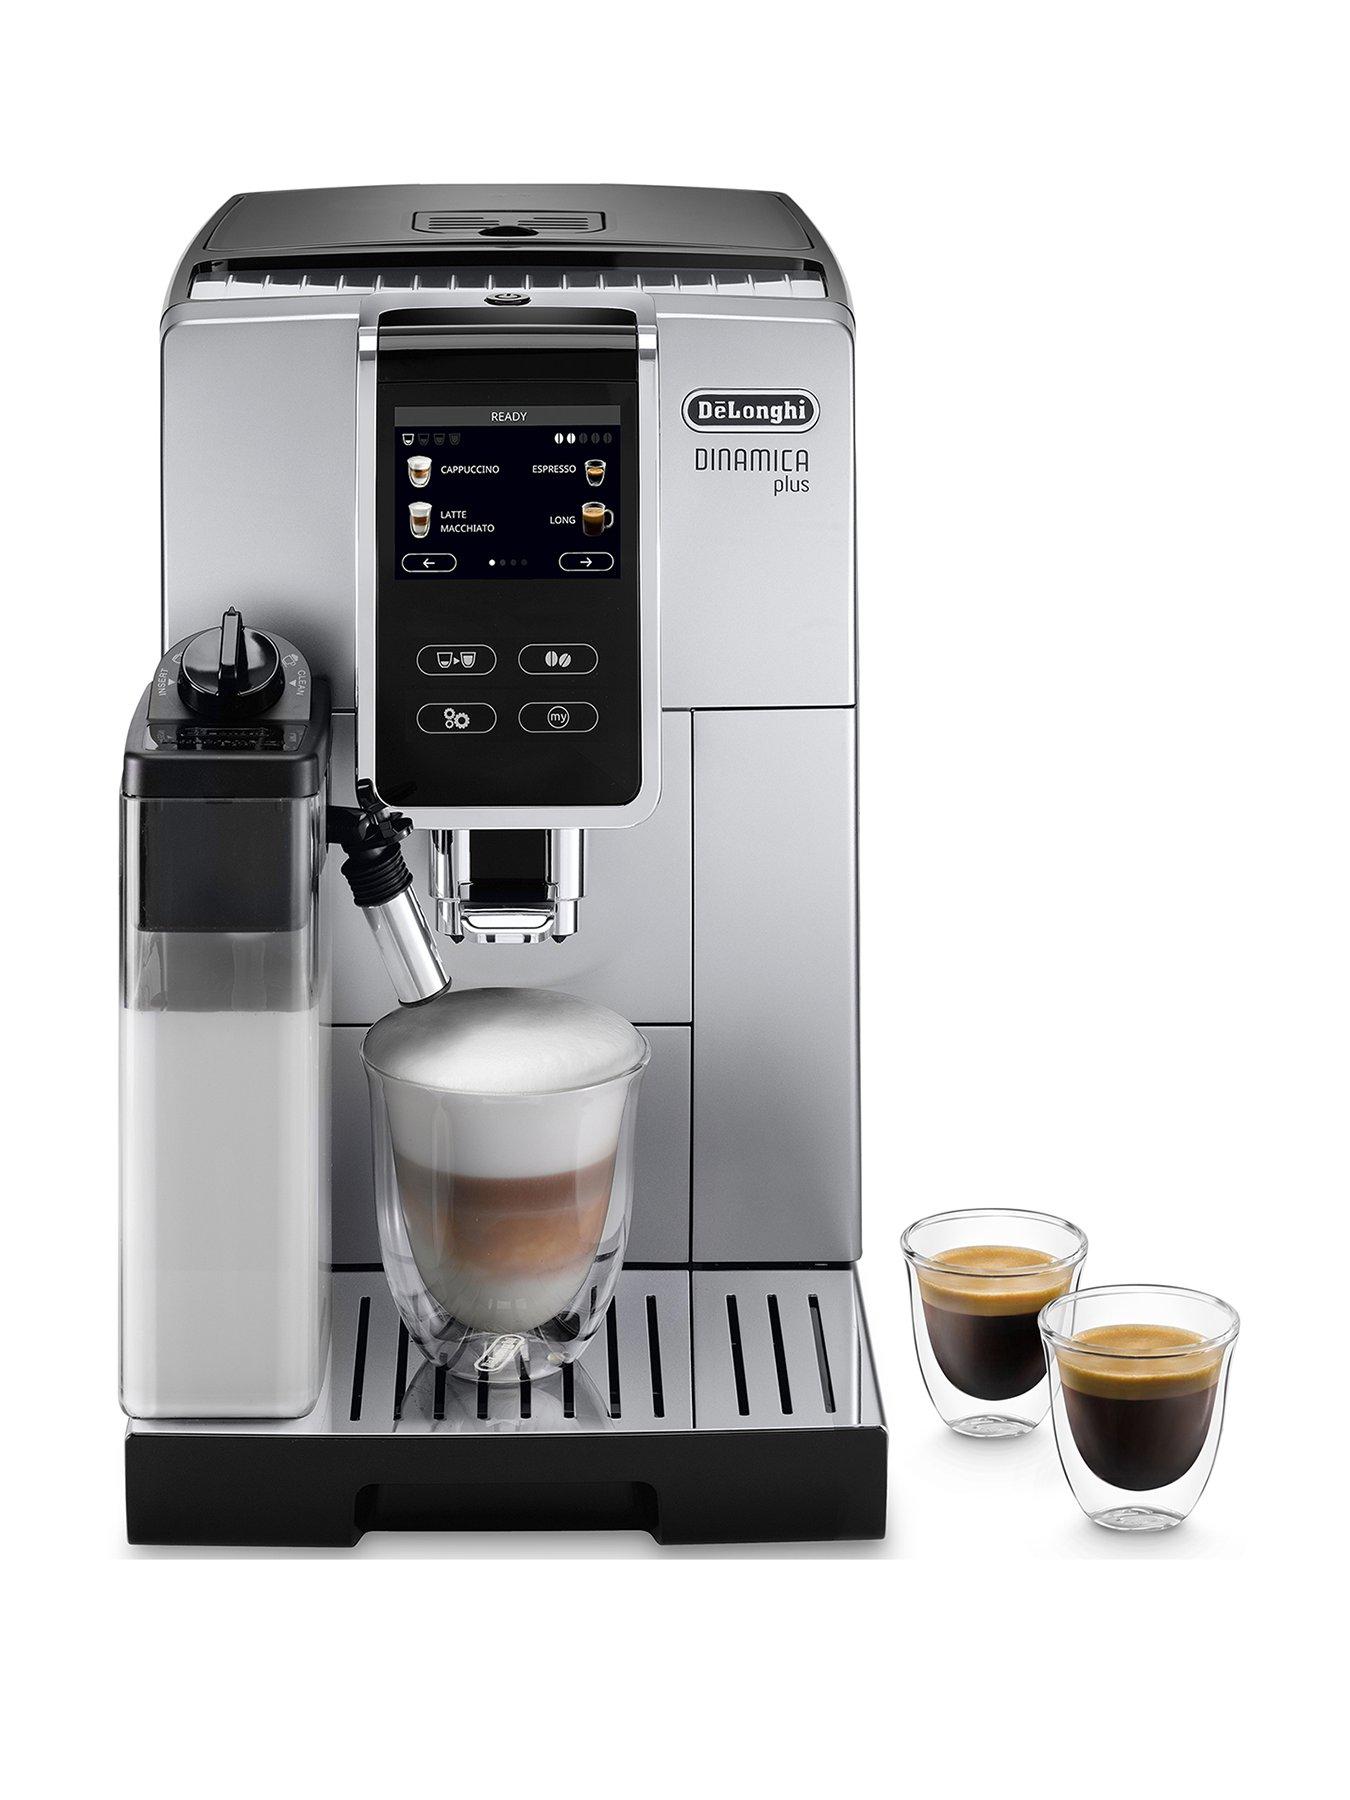 DeLonghi Dinamica Plus Bean to Cup Coffee Machine | littlewoods.com